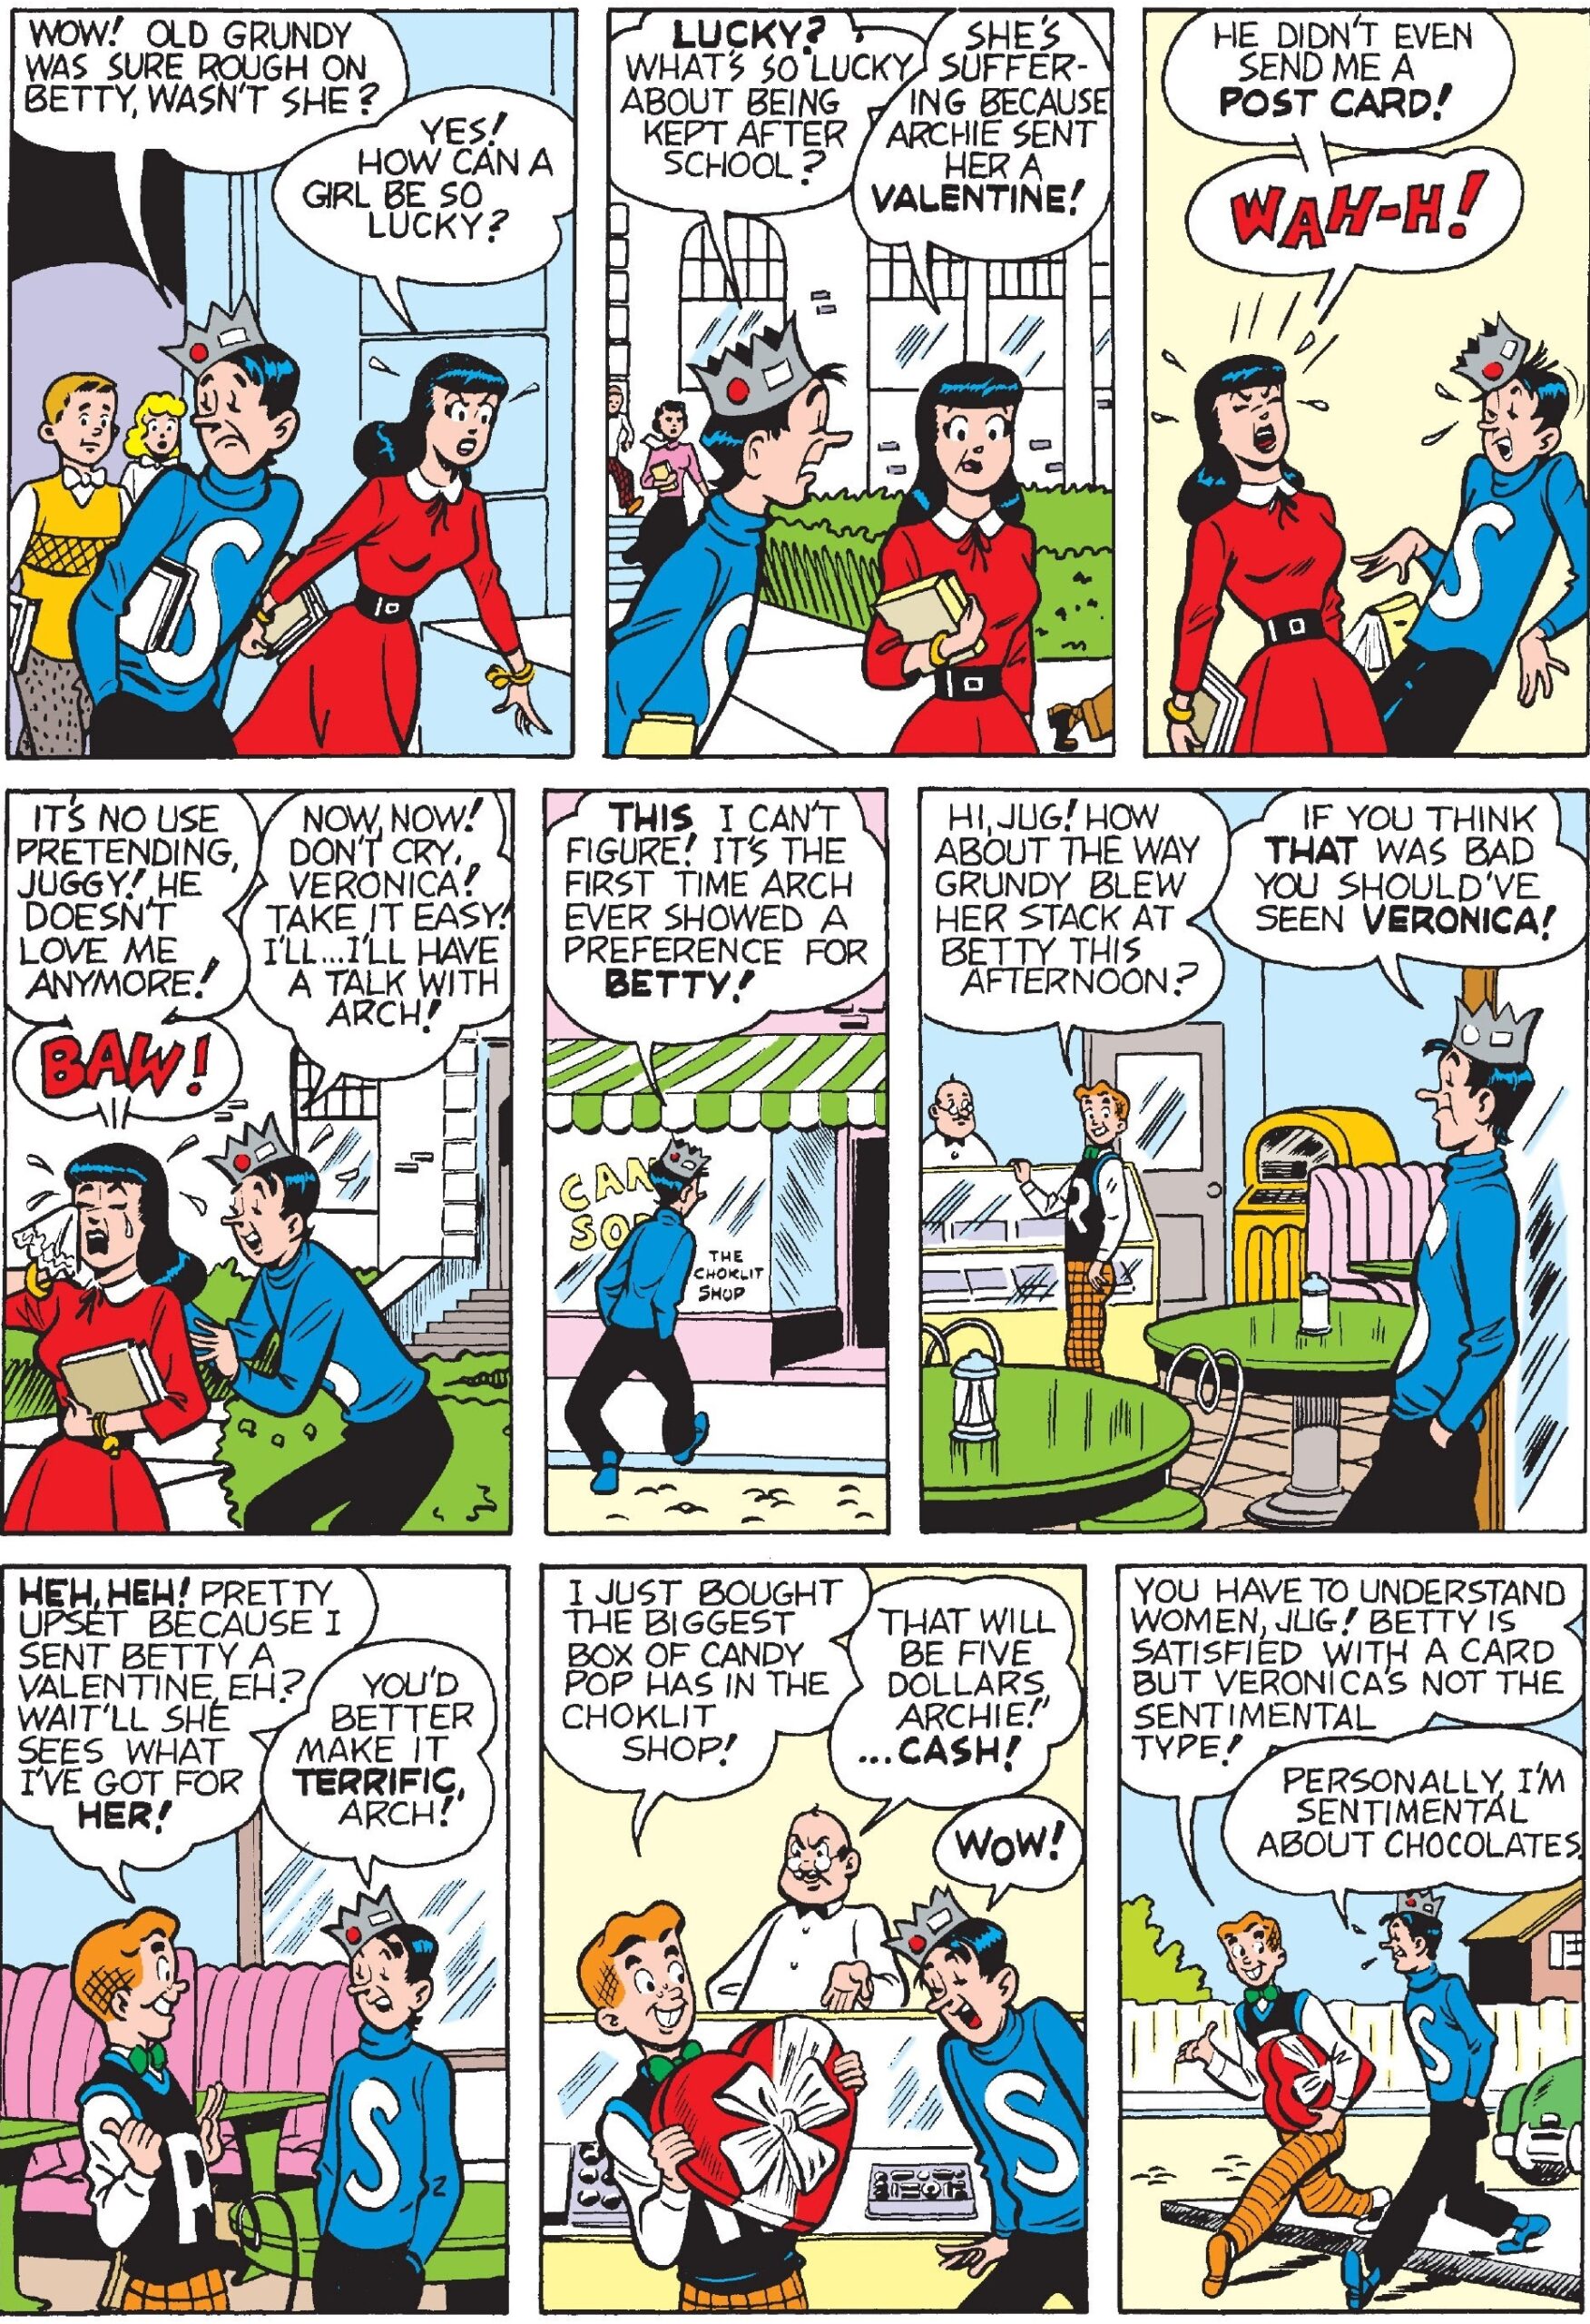 Archie buys Veronica candy